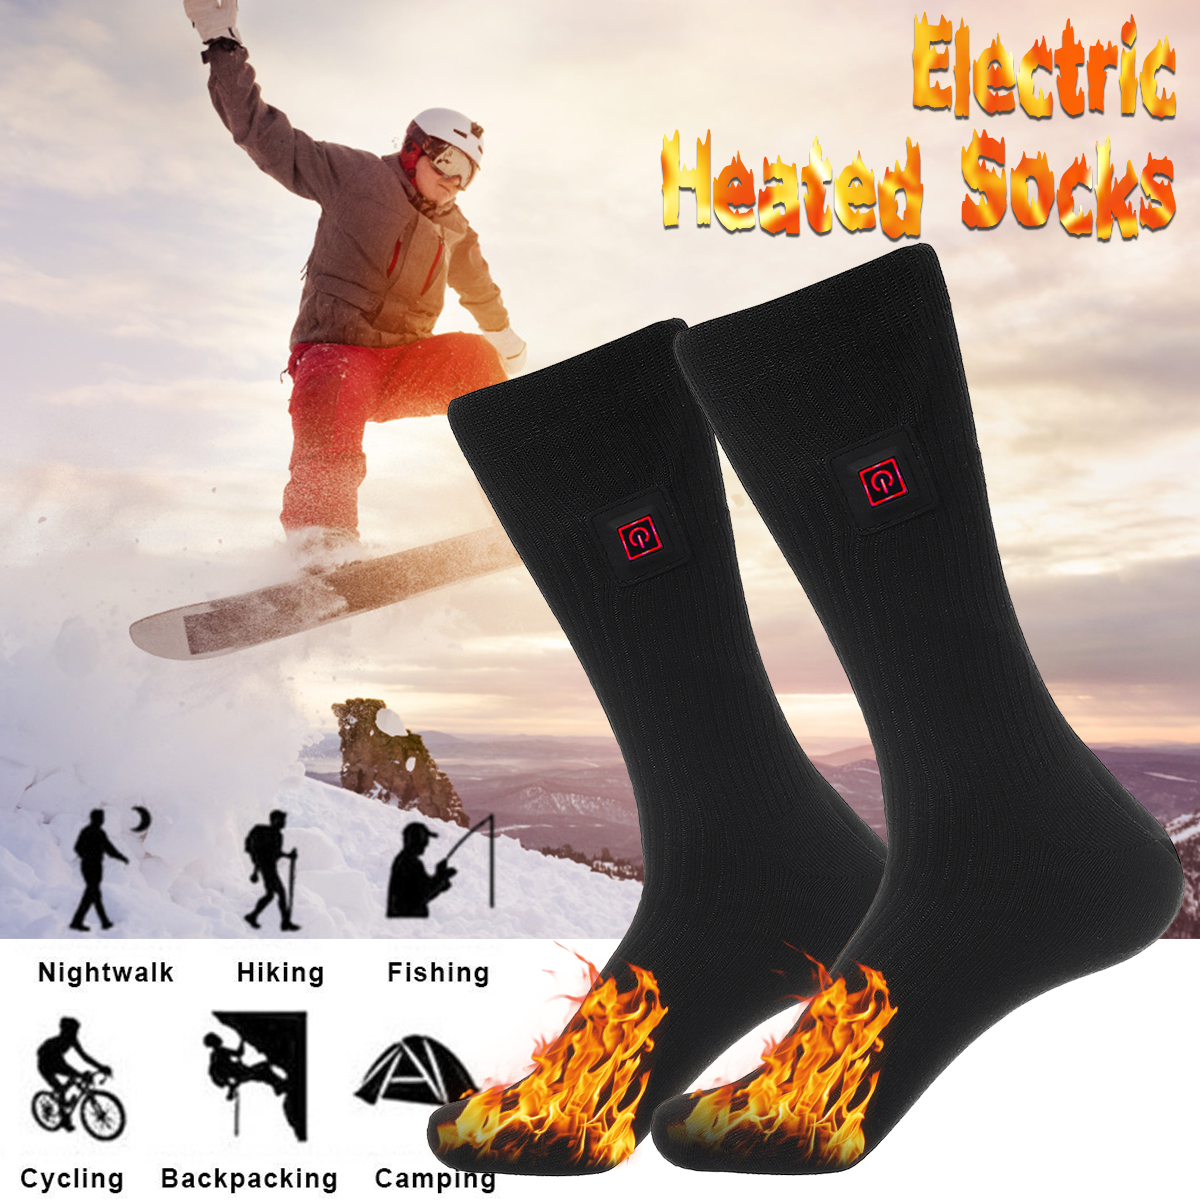 Electric-Heated-Socks-3-Gear-Adjustable-Temperature-Rechargeable-Feet-Warmer-110-220V-1577508-2